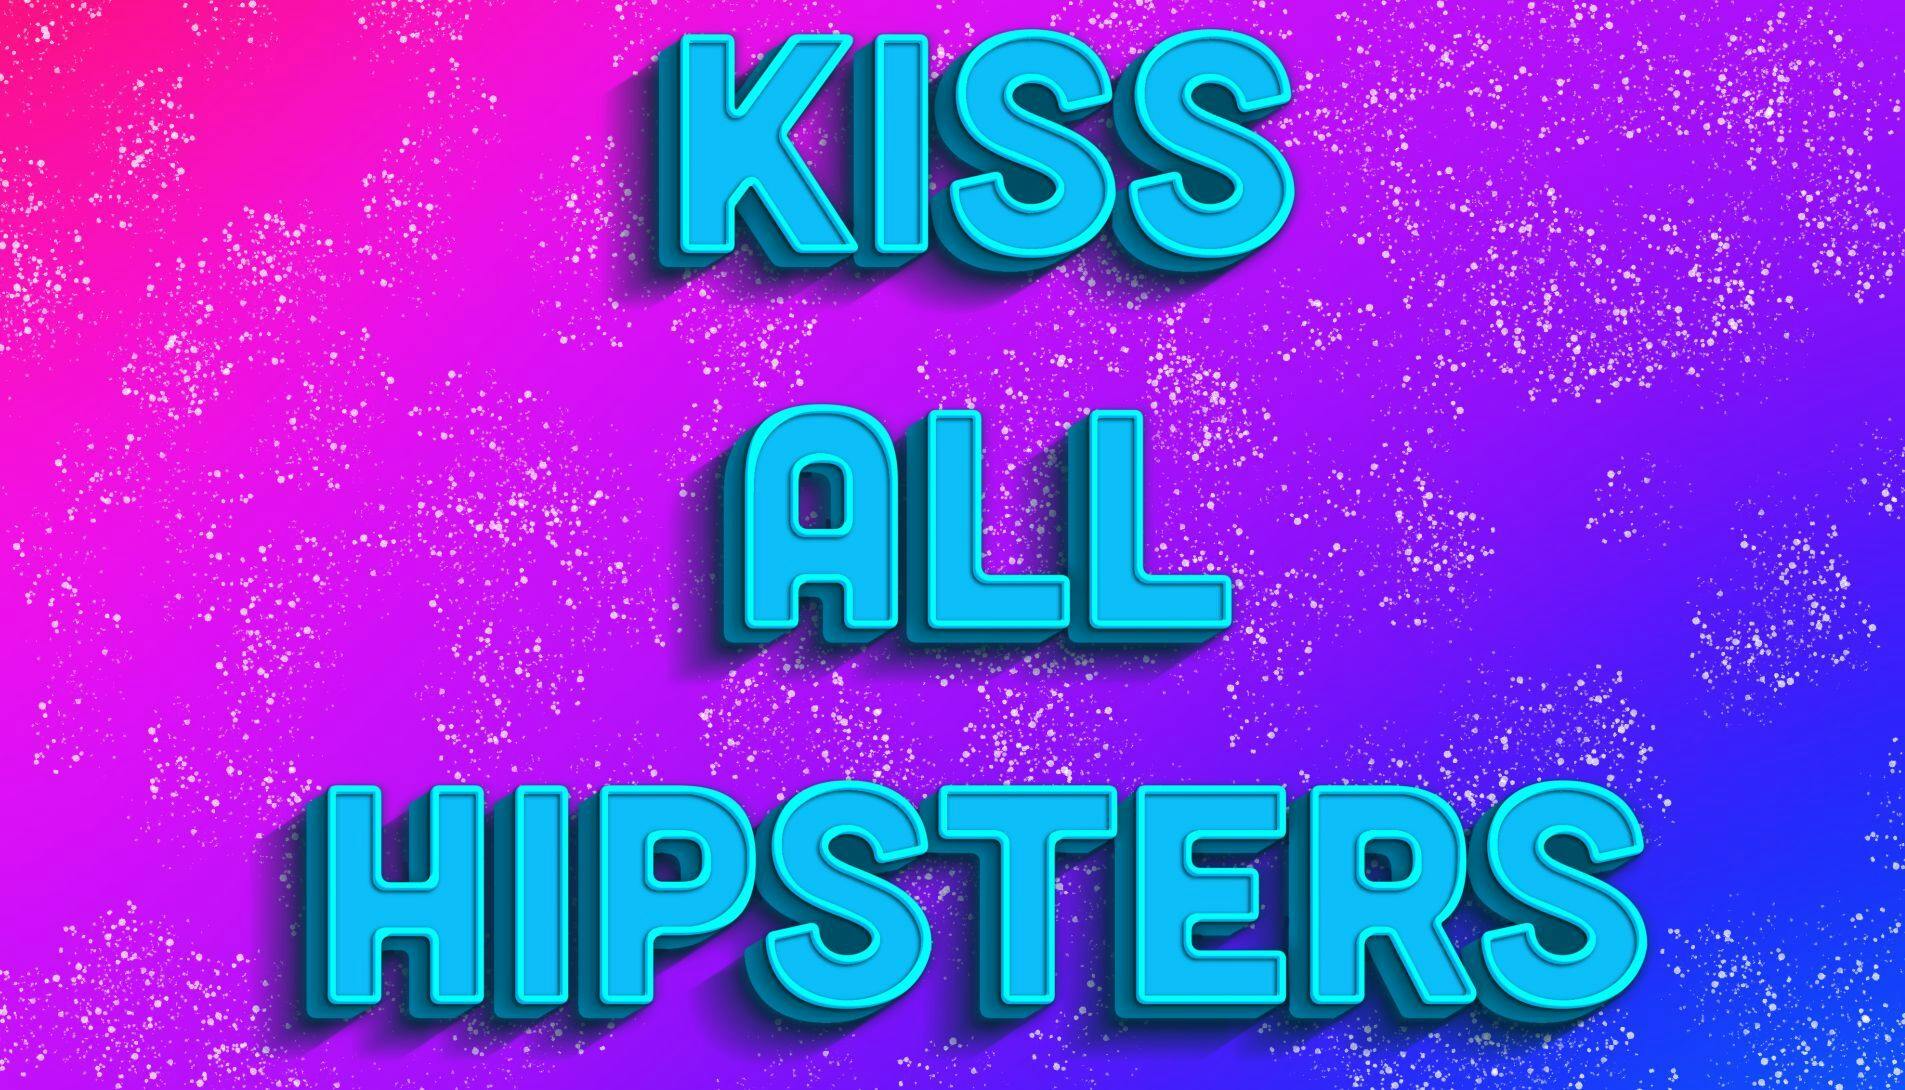 Kiss All Hipsters (live) - The Mysterines en C.O.F.F.I.N